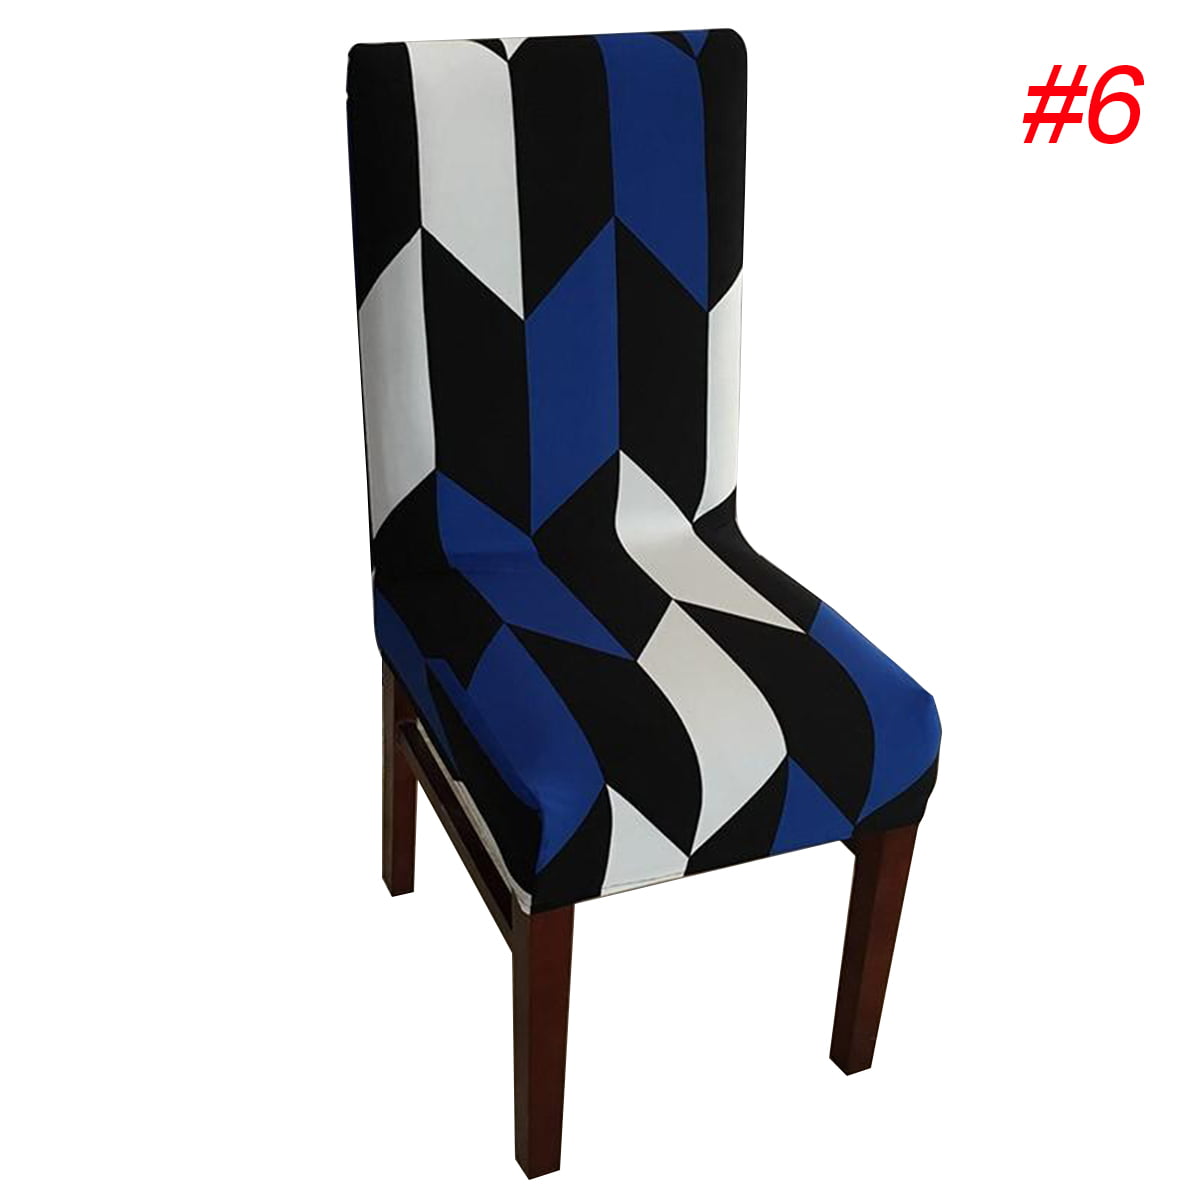 Details about   Printed Elastic Spandex Chair Cover Dining Room Slipcover Wedding Banquet Decor 